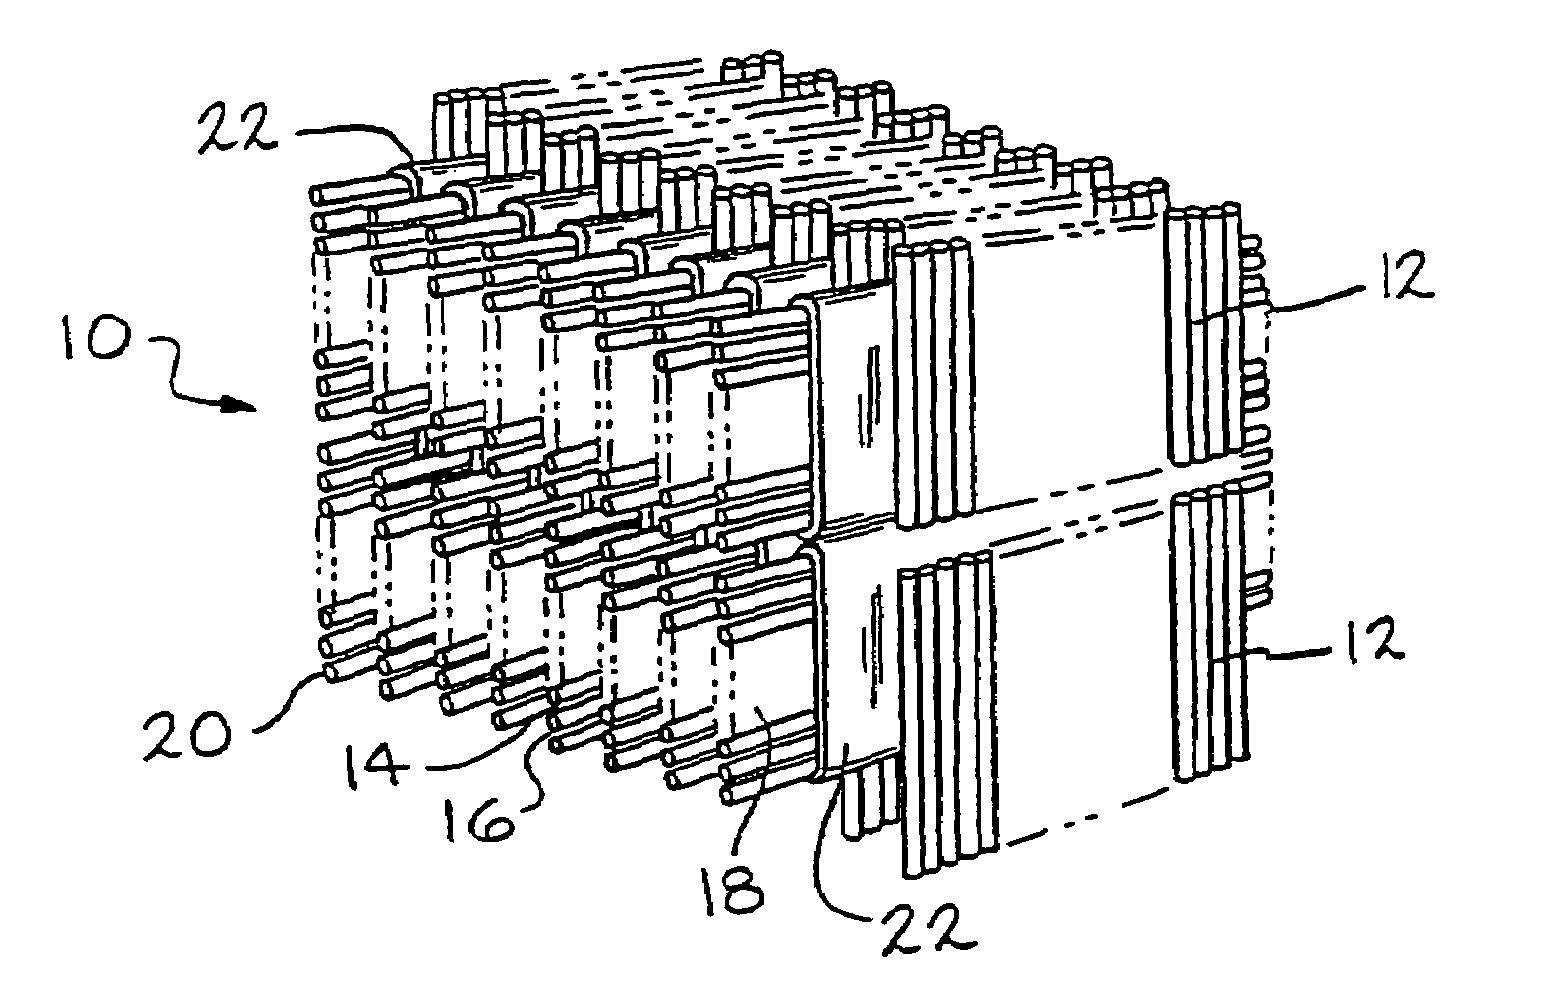 Low alkali sealing frits, and seals and devices utilizing such frits